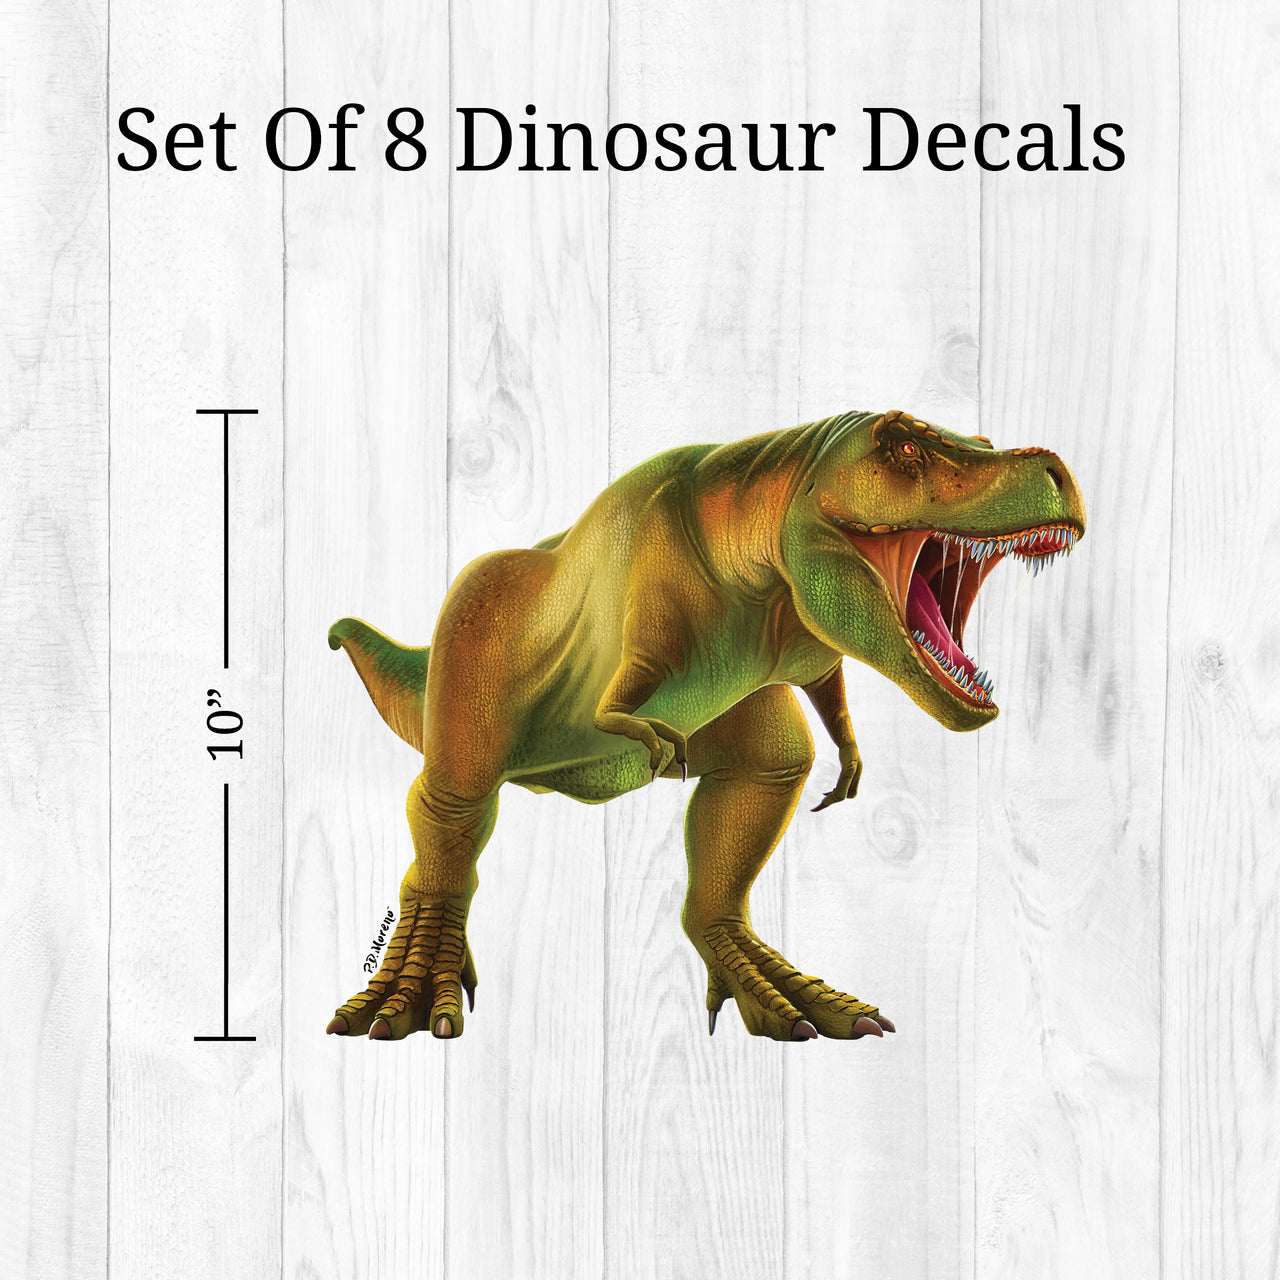 T-Rex and Friends Wall Decals